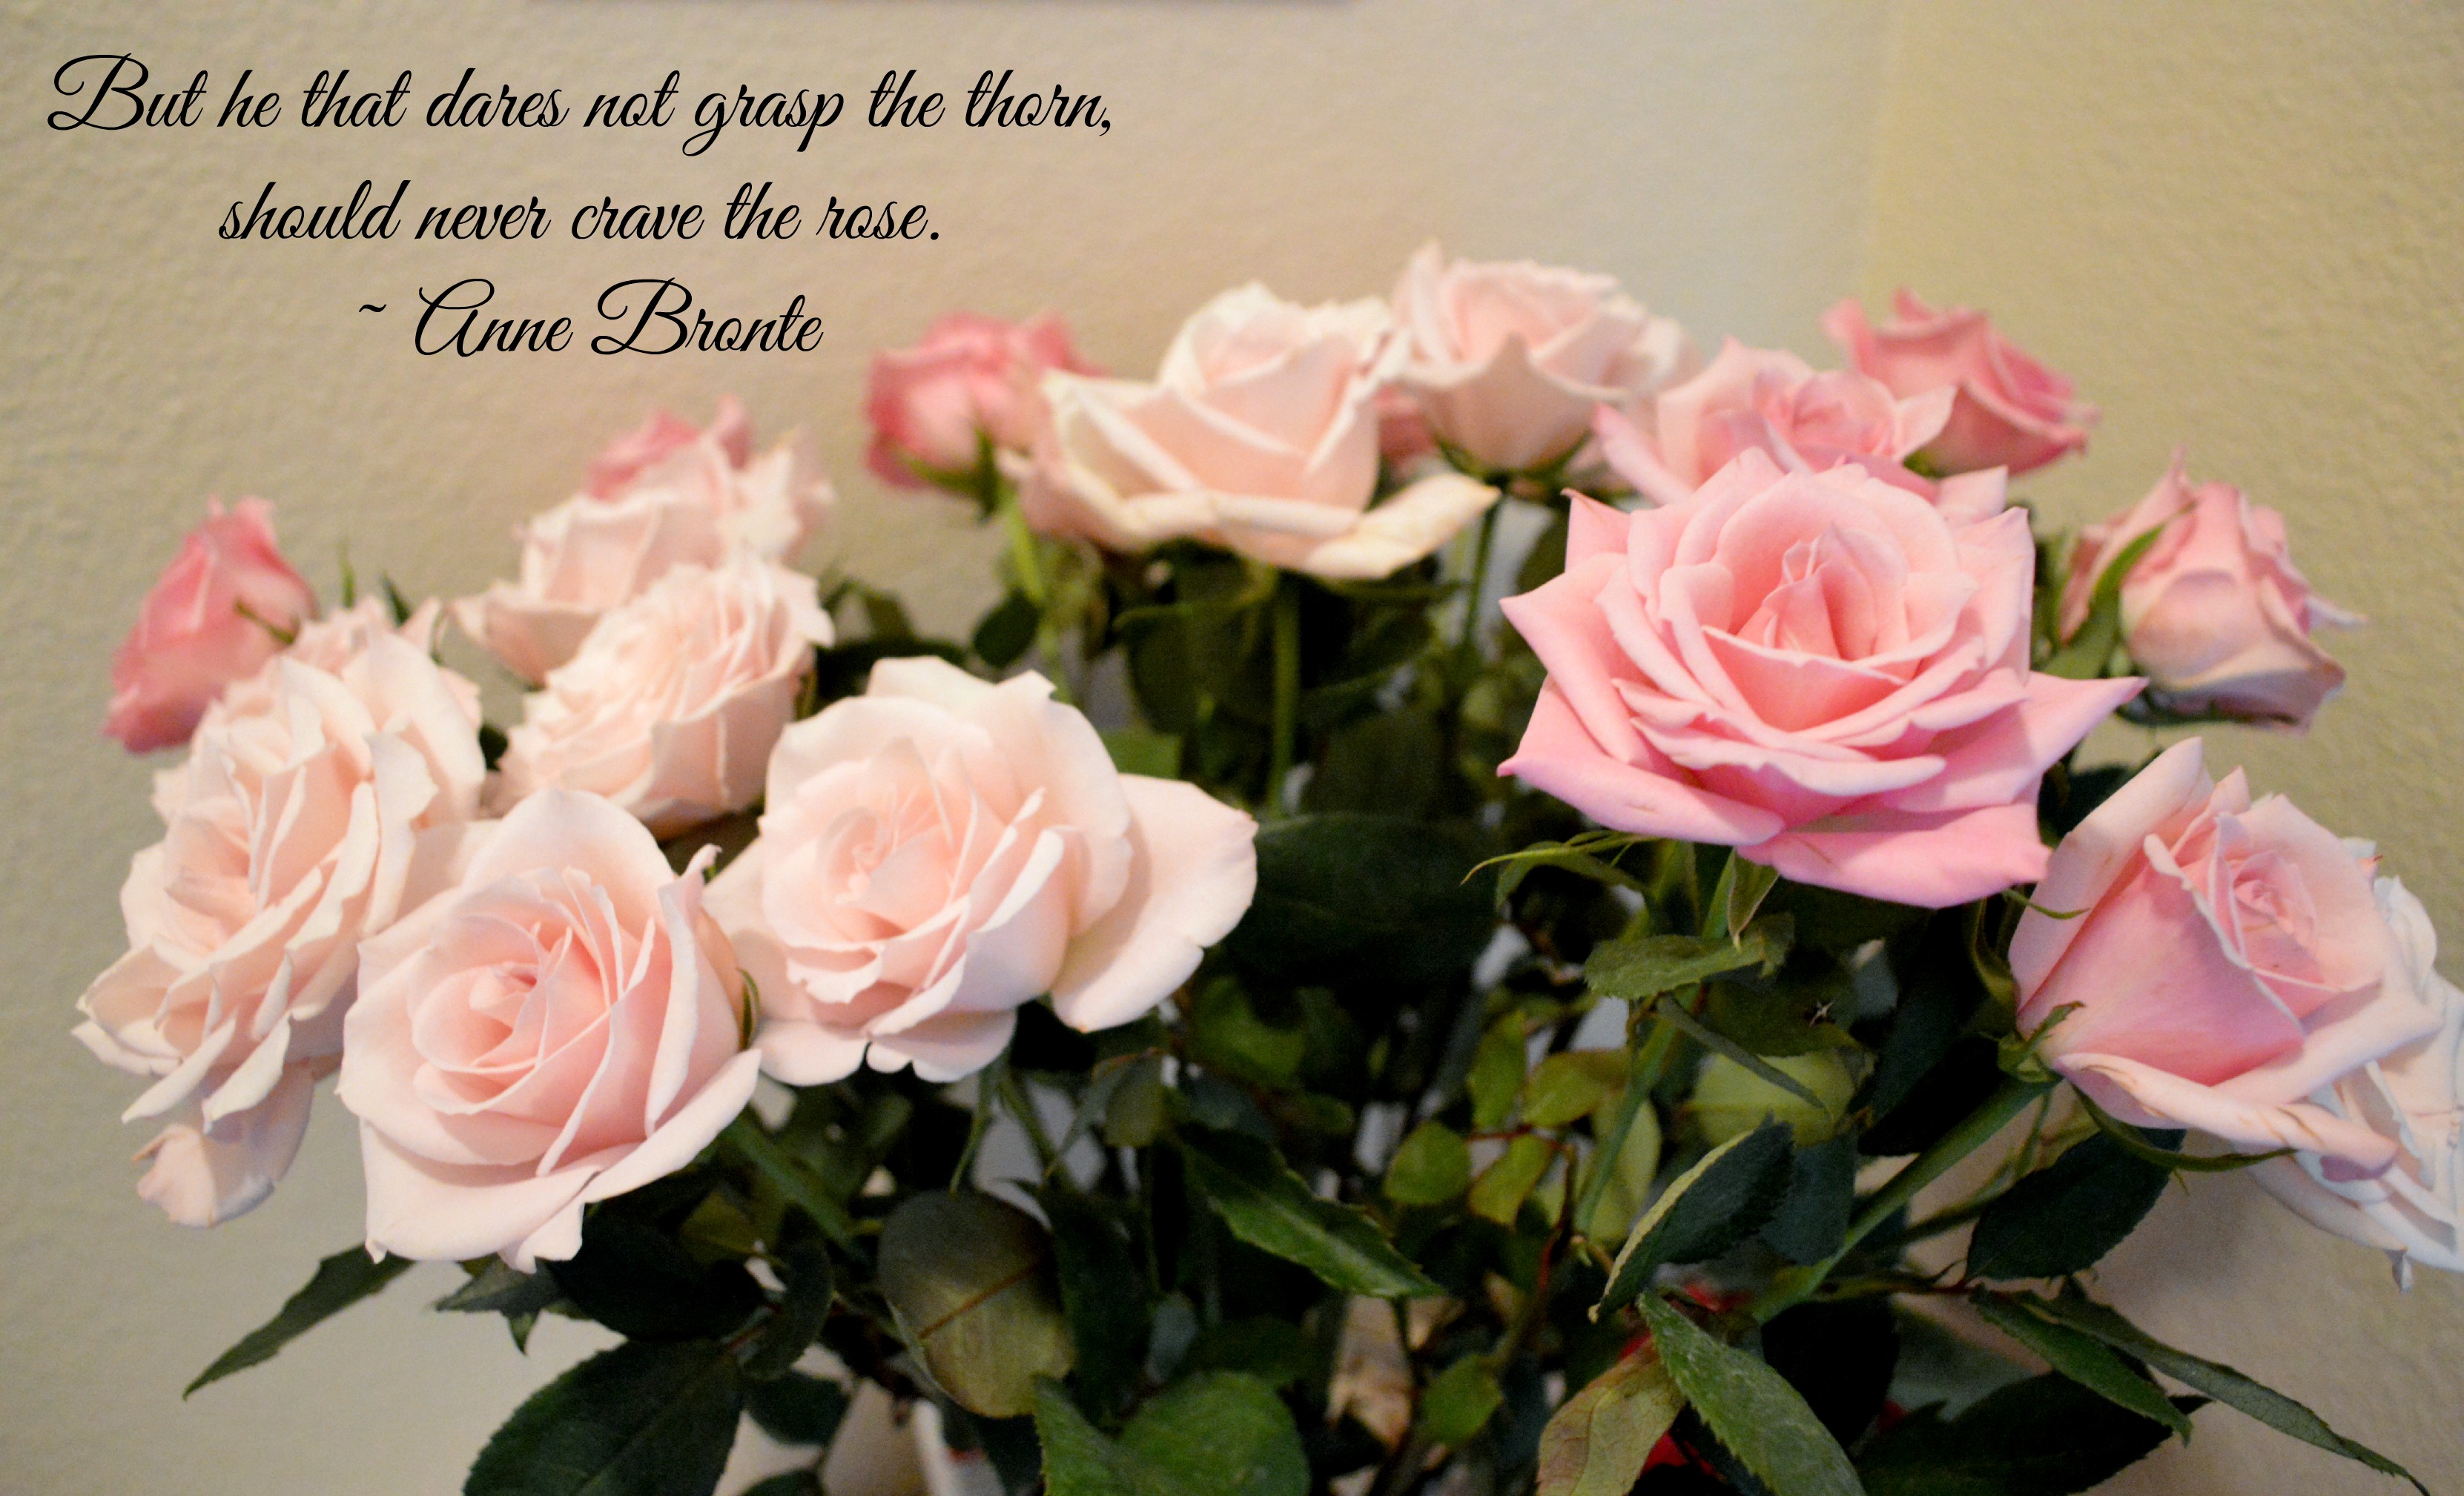 grasp-the-rose-quote.